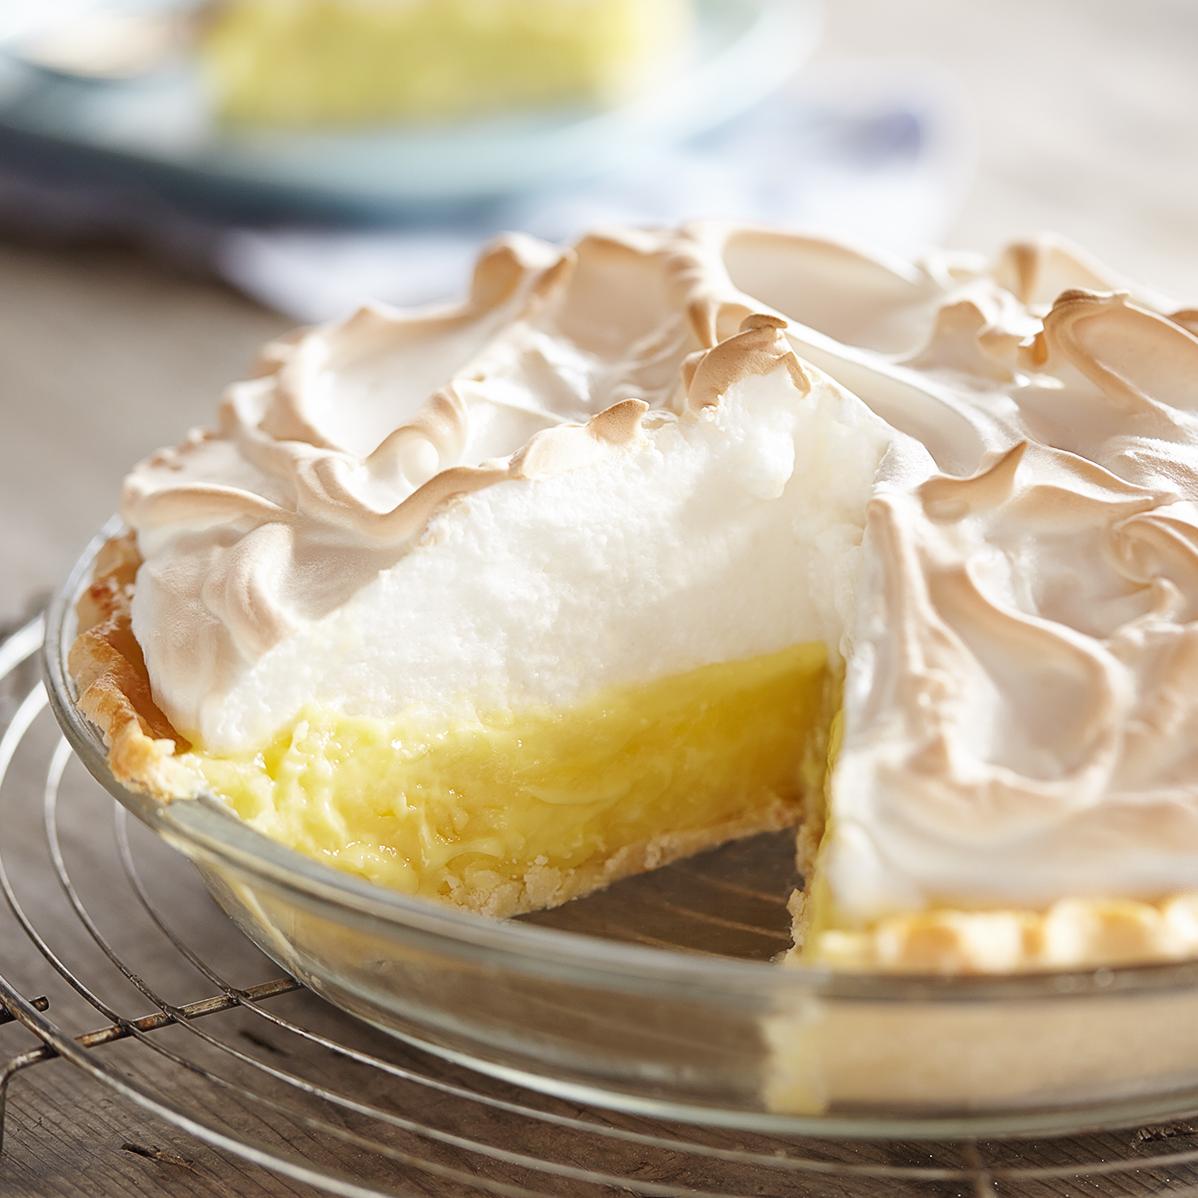  Enjoy a sweet and tangy delight that's light and fluffy.